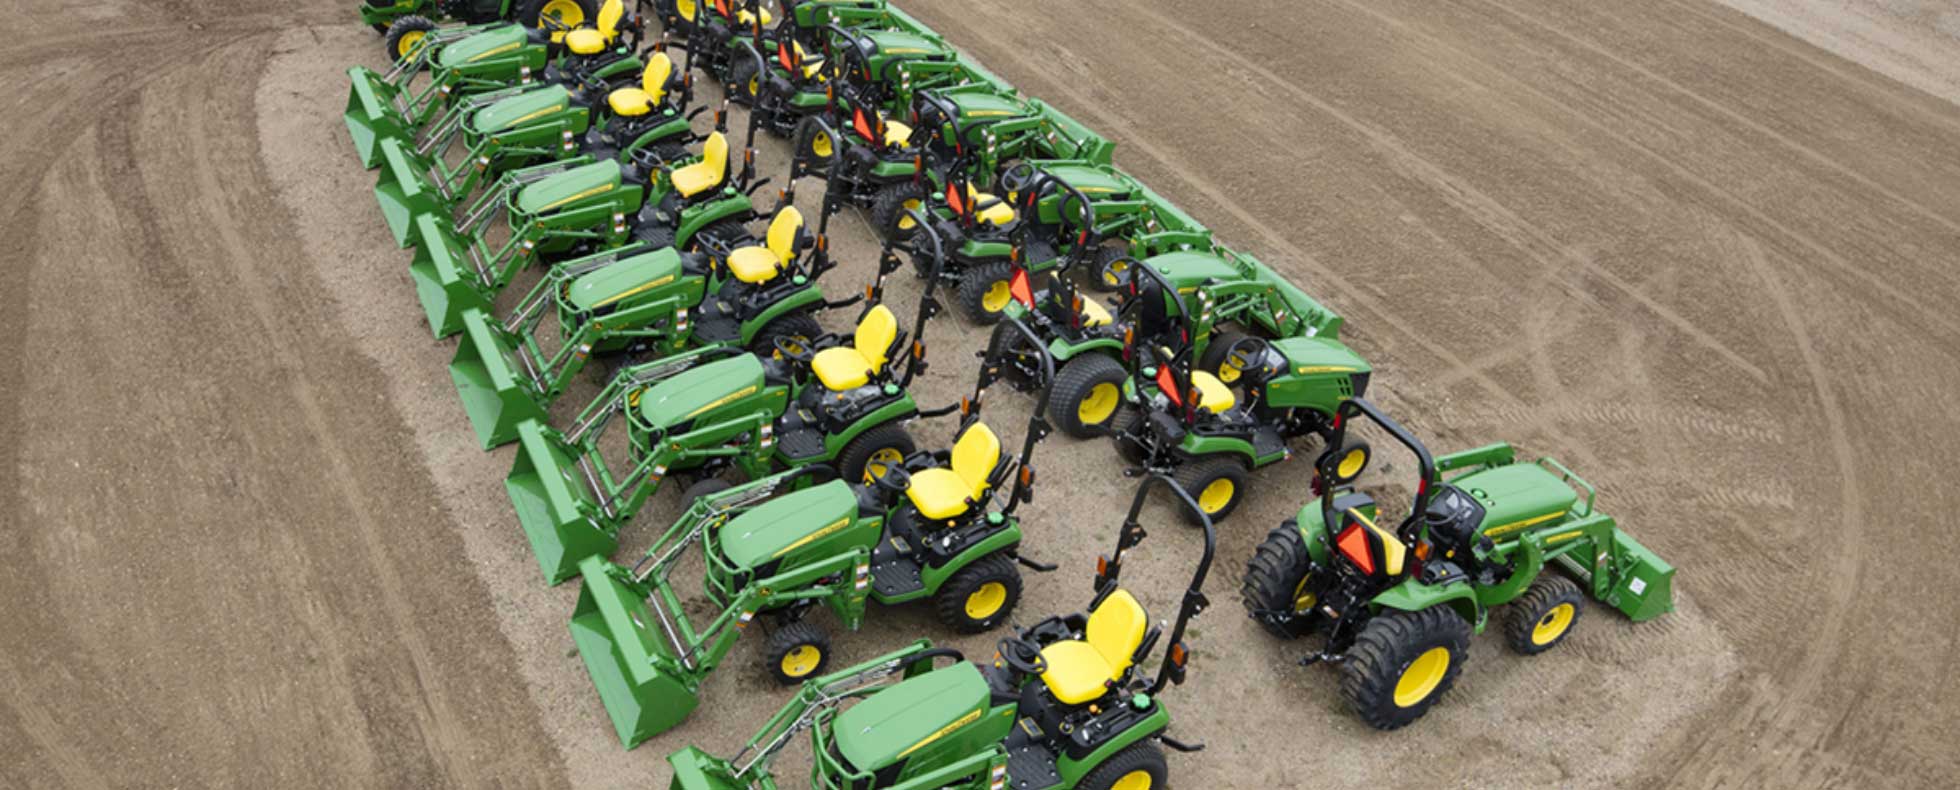 5 Tips for Buying a Used Compact Tractor